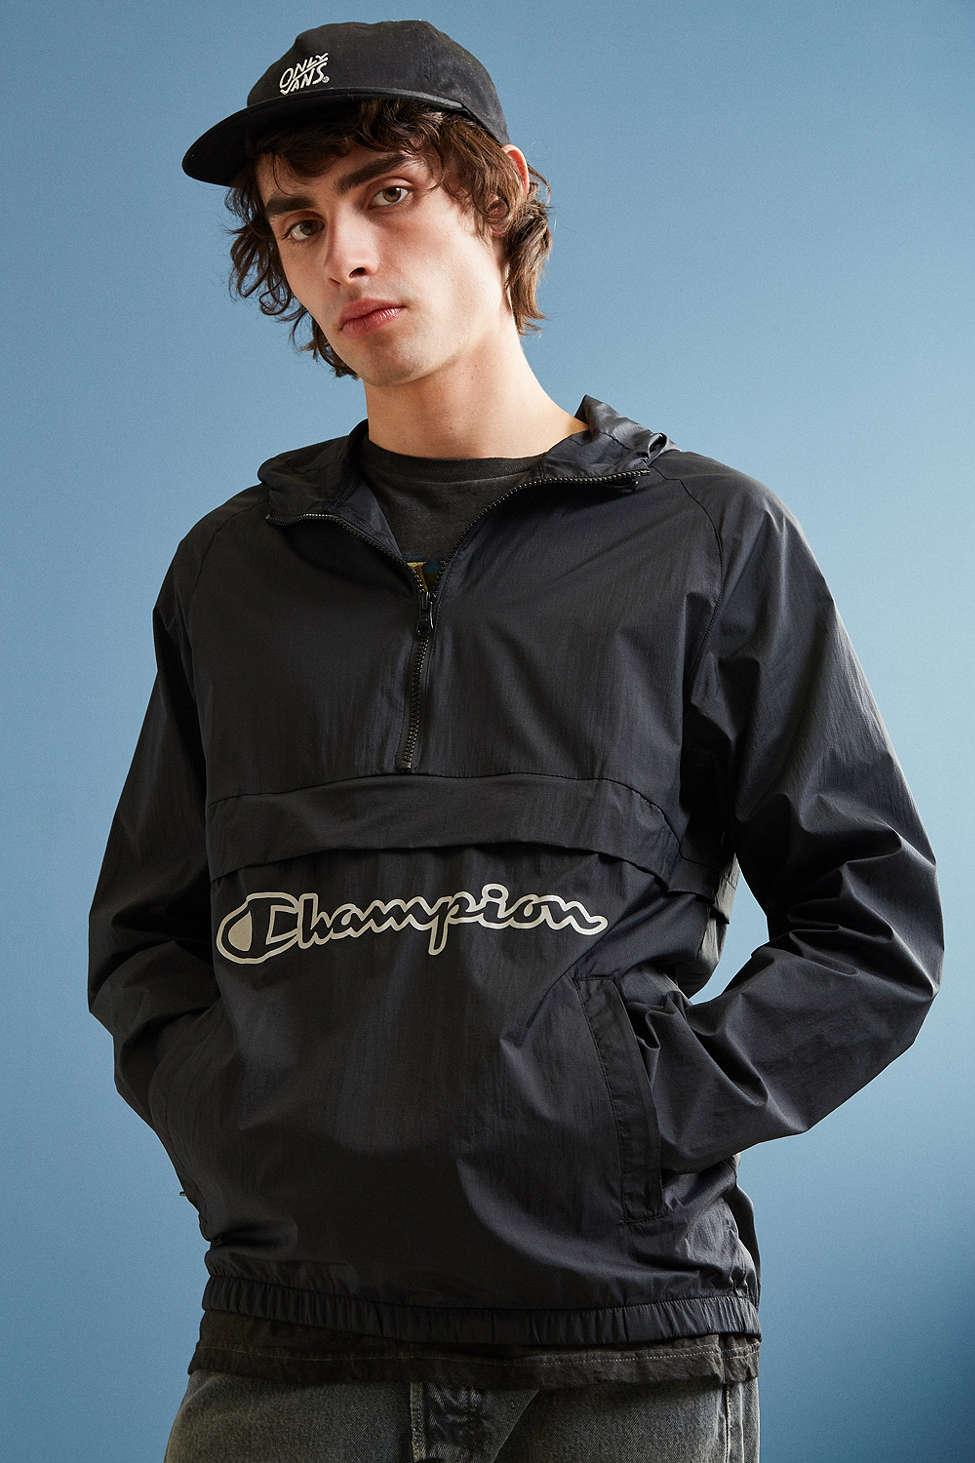 Manorak Jacket Hot Sale, UP TO 50% OFF | www.pcyredes.com